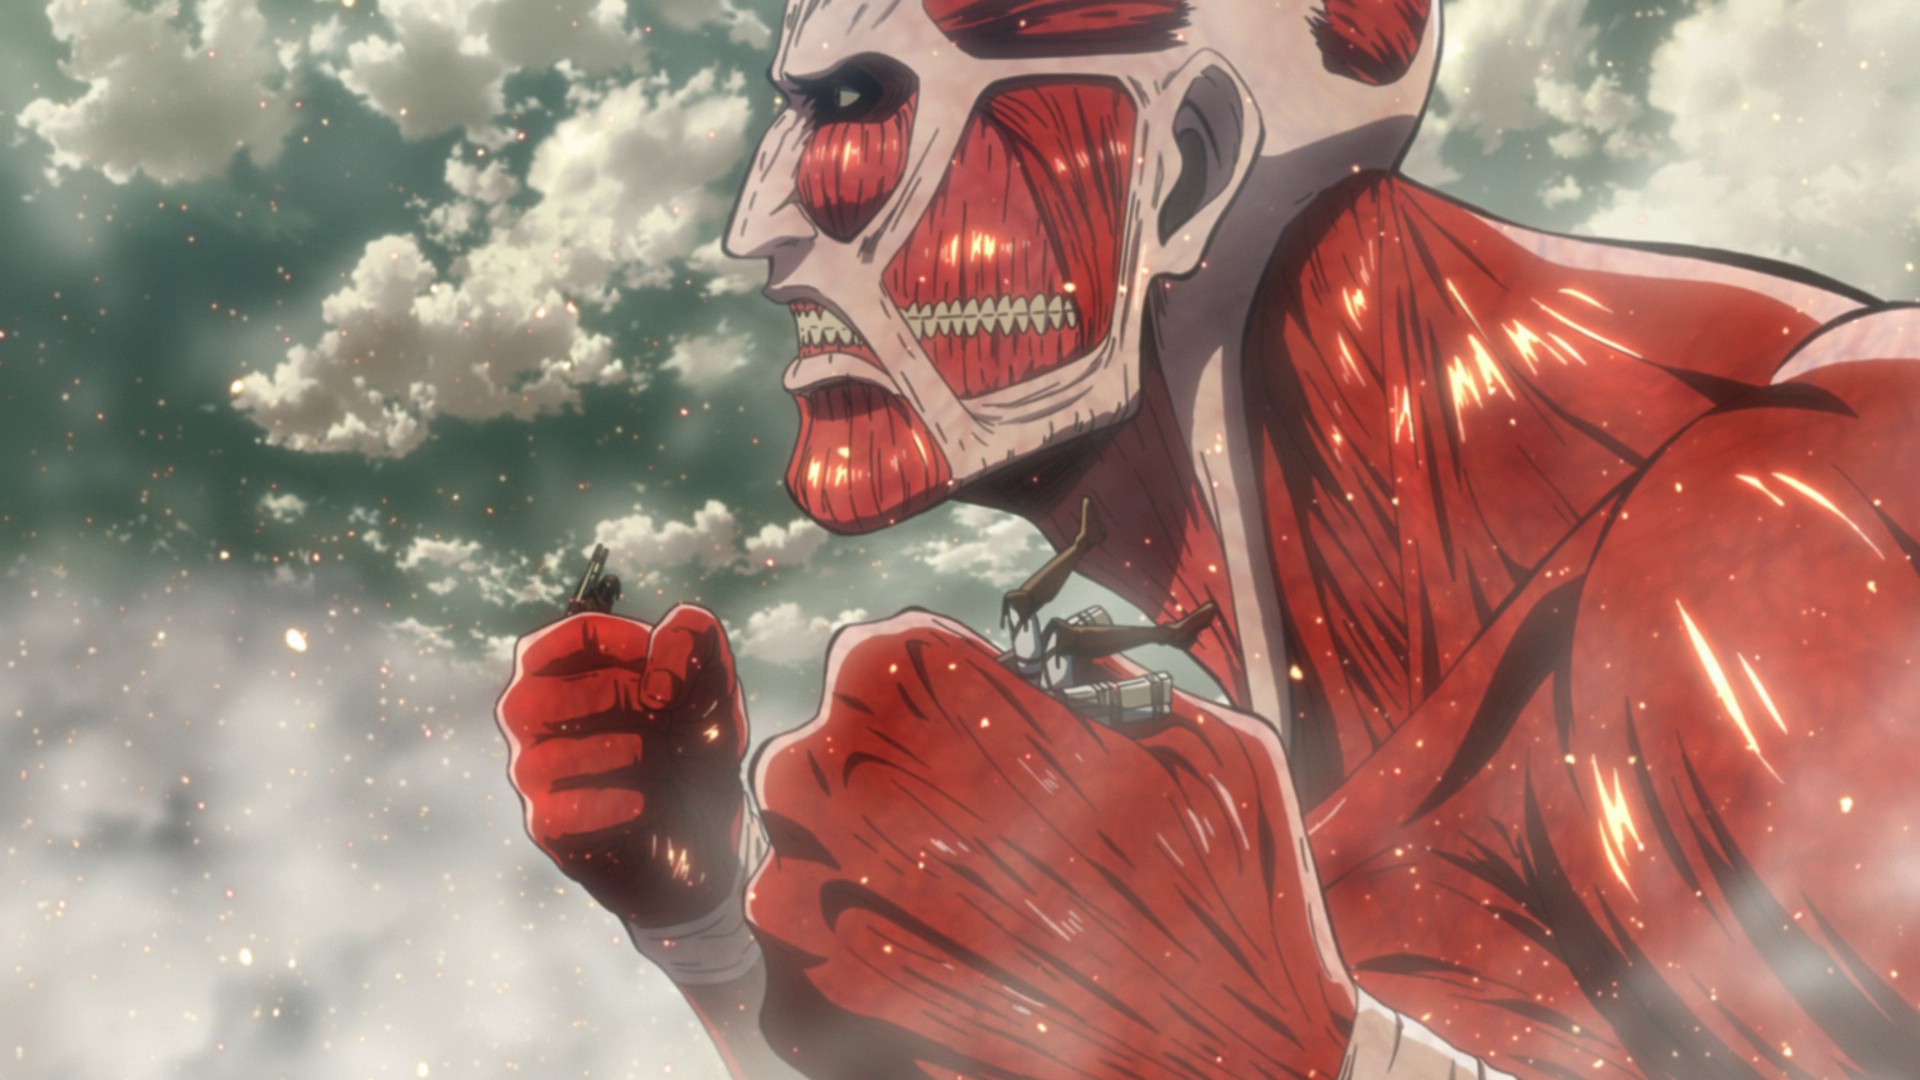 Image - The Colossal Titan grabs Ymir and another soldier ...